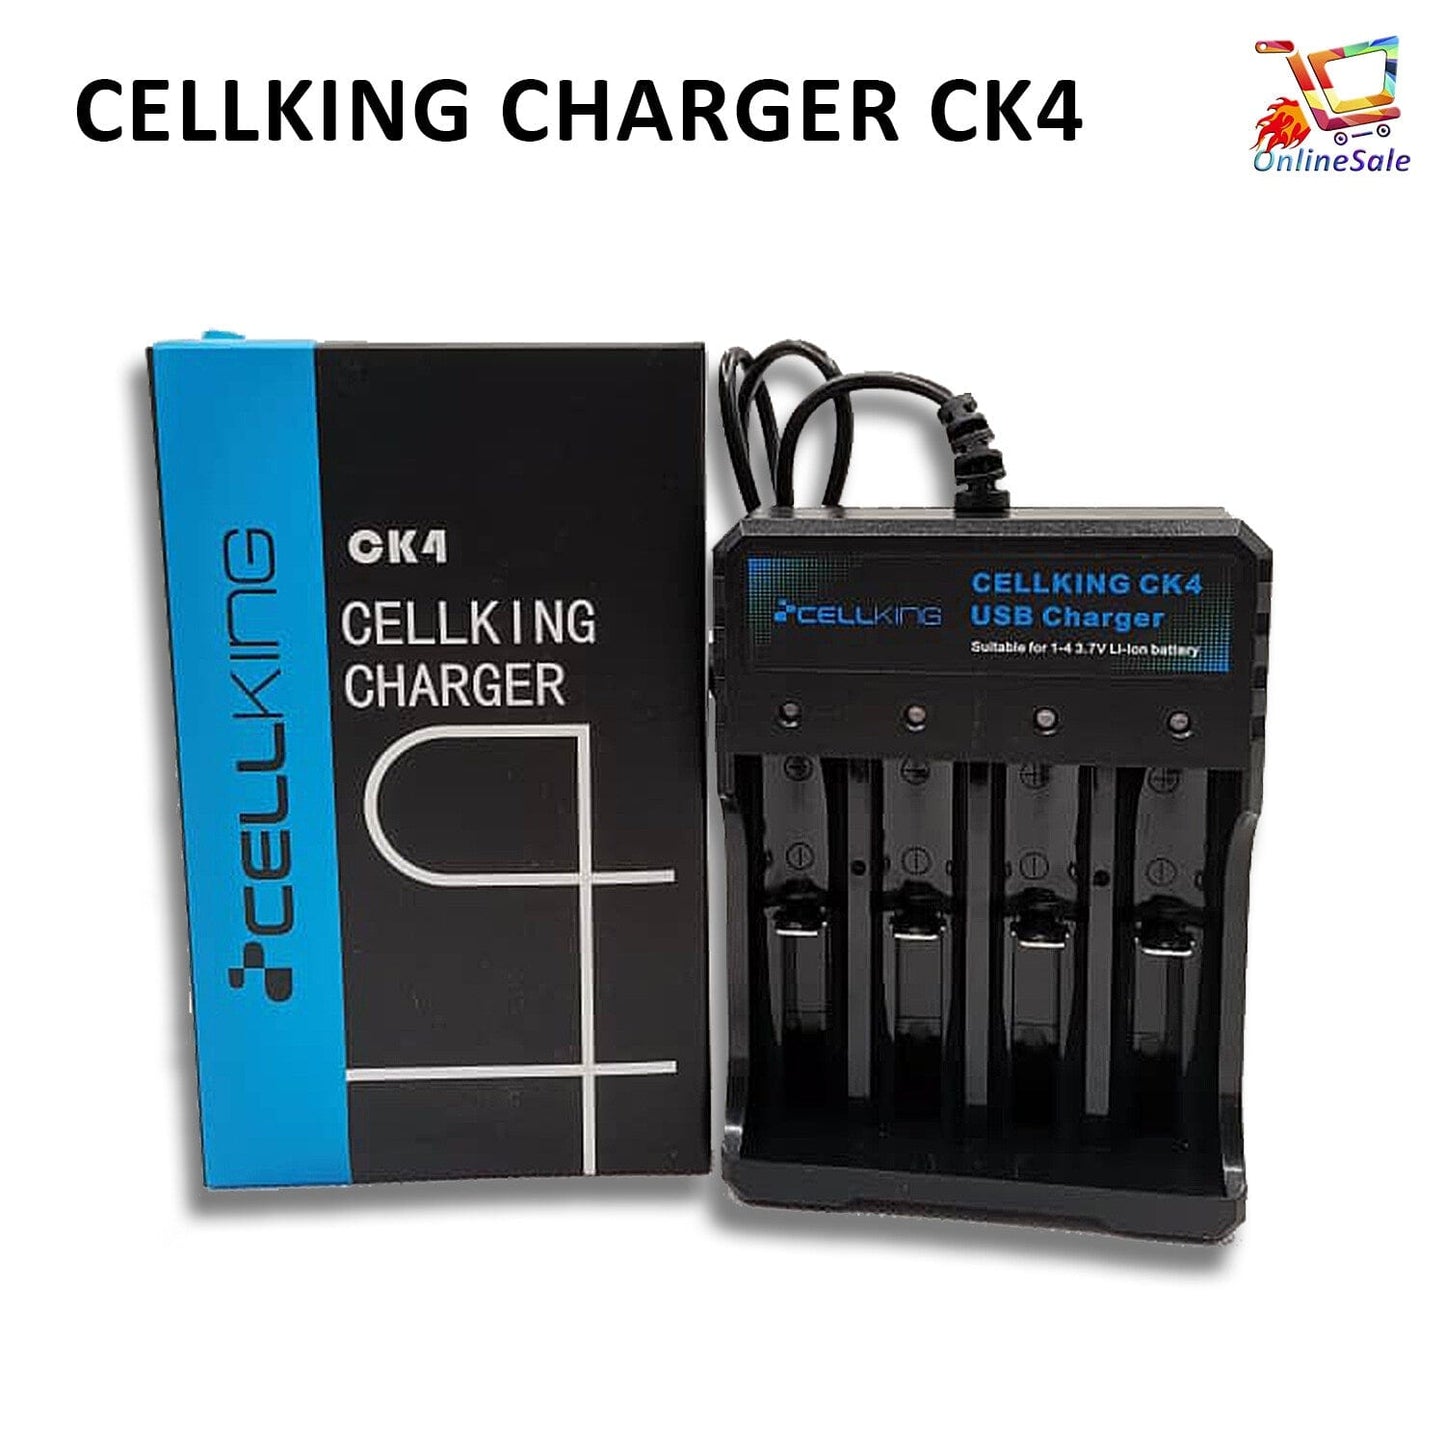 CellKing CK4 Charger 4 Slot At Best Price In Pakistan